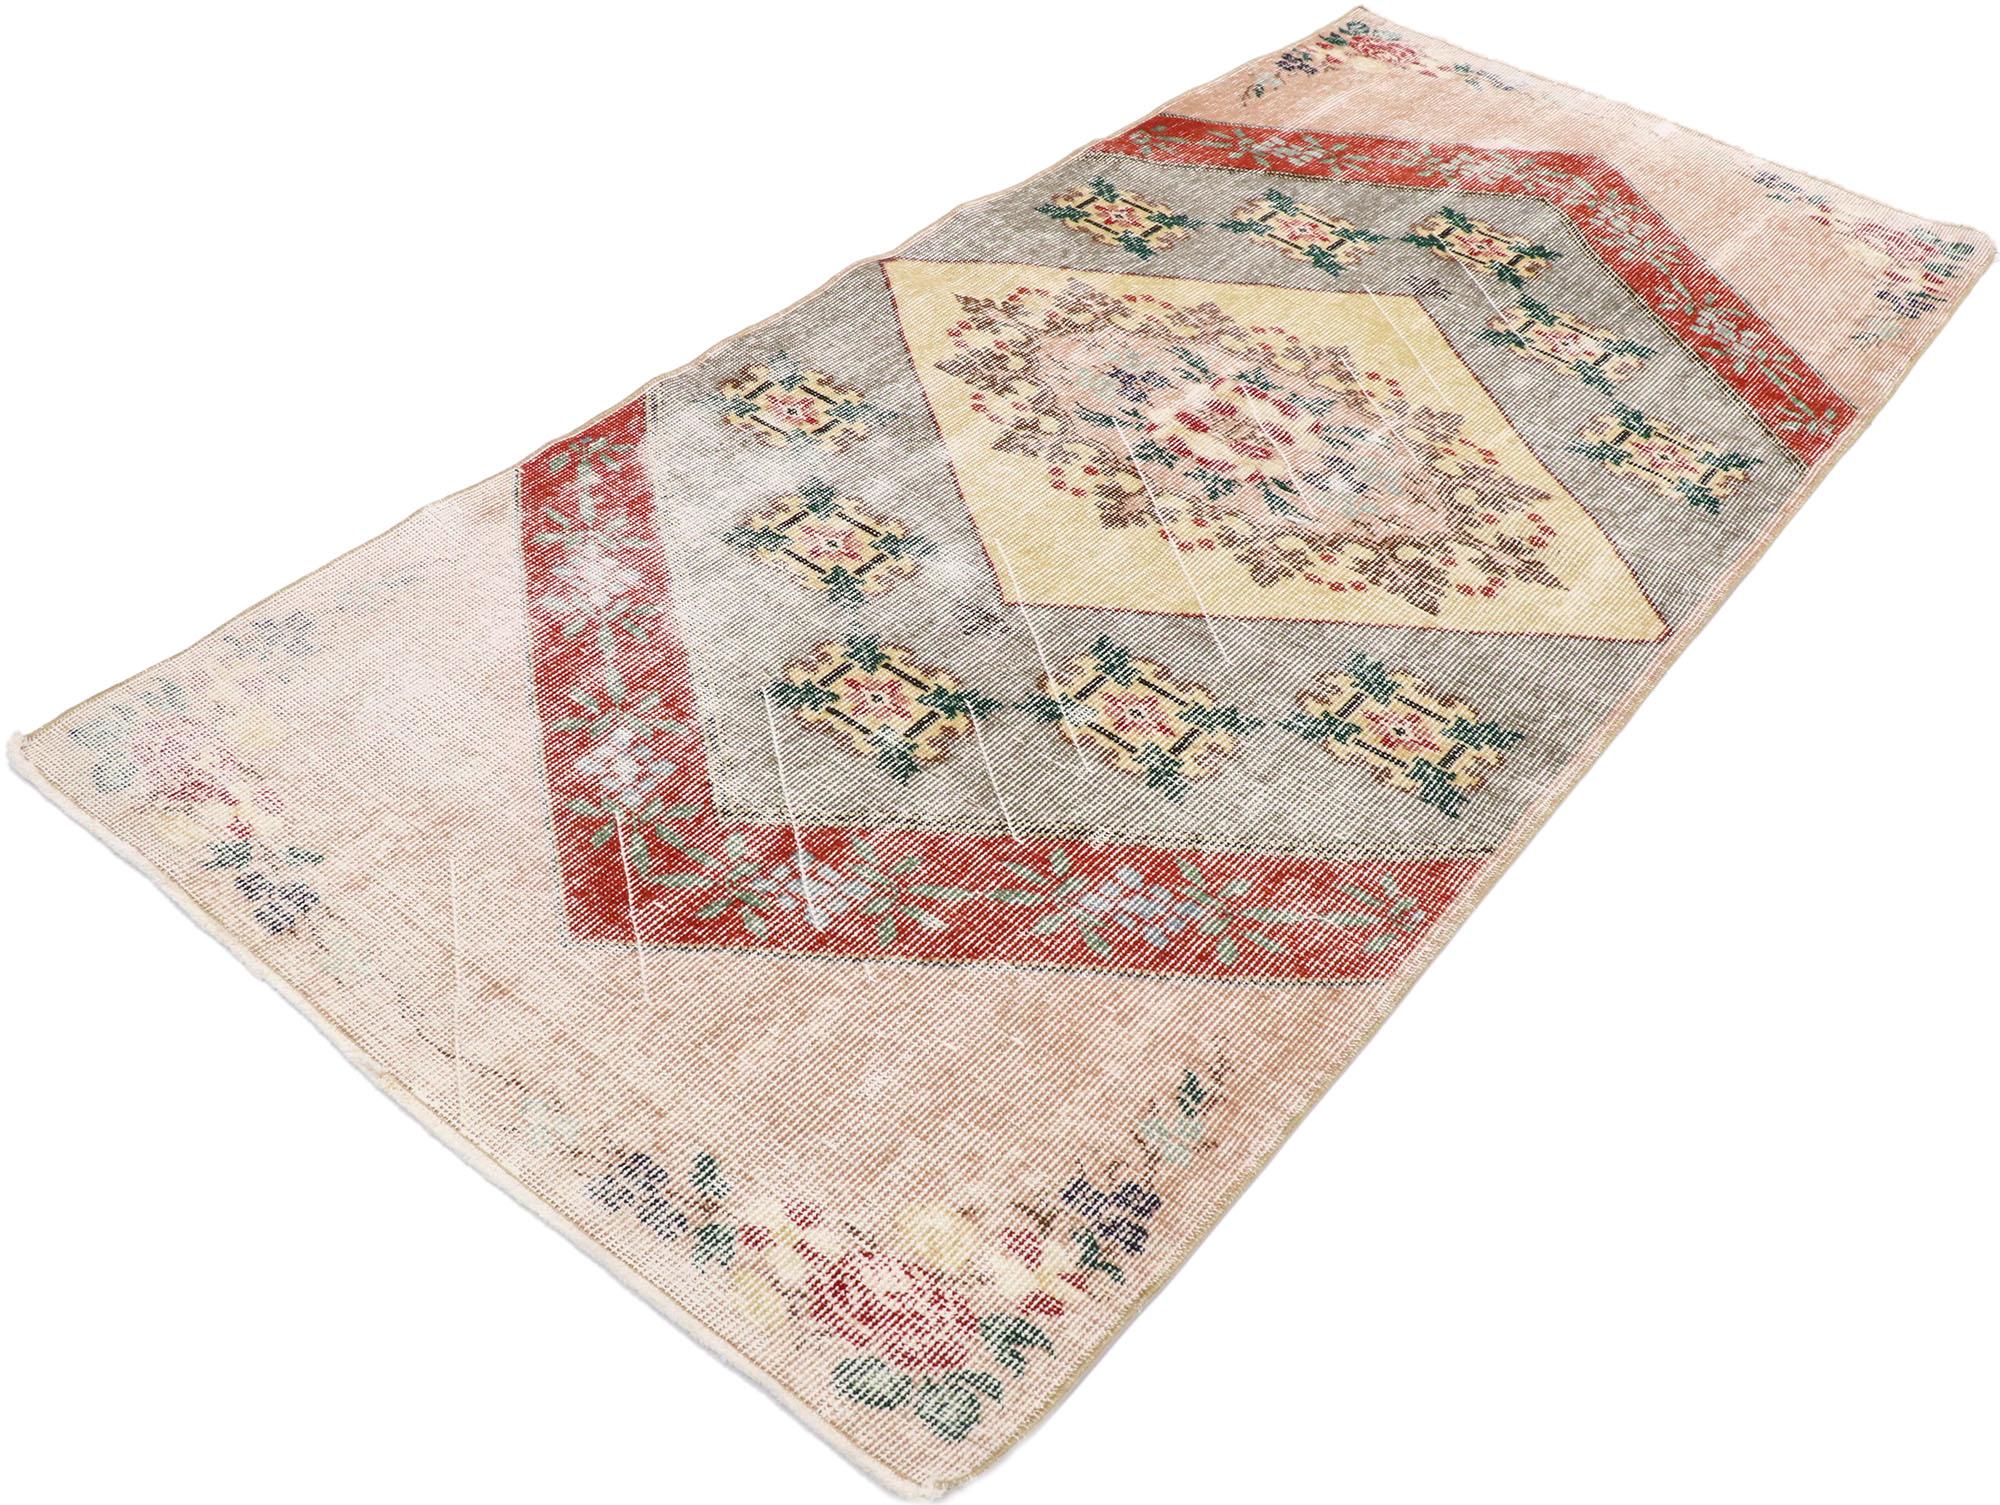 53303 distressed vintage Turkish Sivas rug with rustic English country style. Take a floral design and understated elegance, mix in a dash of romantic connotations and rustic sensibility to get this fresh look that’s as comfortable as it is chic.